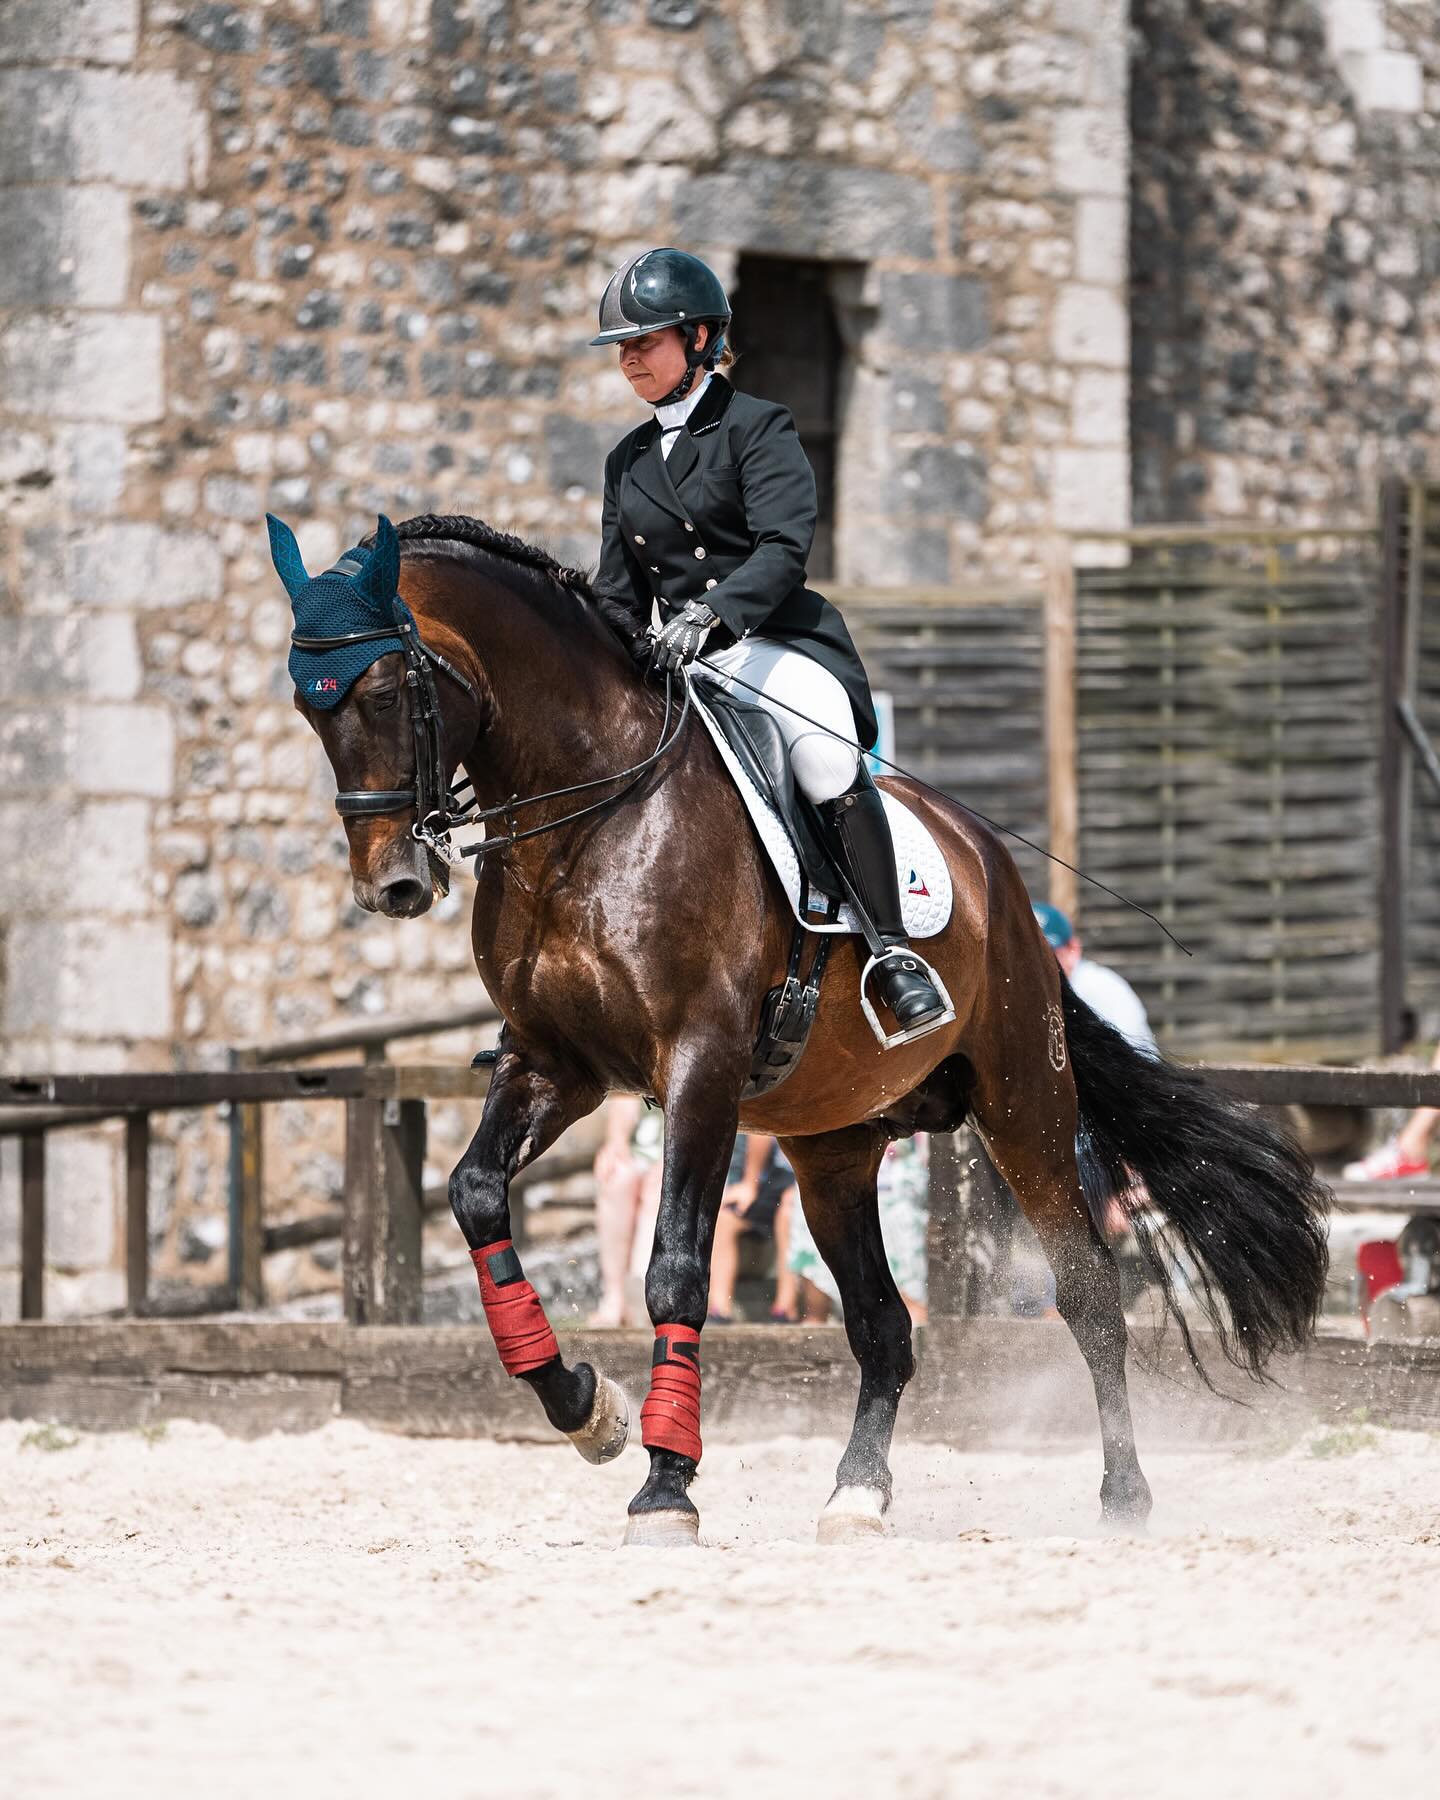 Ready for the show 🔥🇫🇷🔥
//
📸 @hpalprod @ecurie_mgd 
//
#dressage #equitation #provins #remparts #equitation2024 #riseroparis #madeinfrance #equestrianstyle #equestrianlife